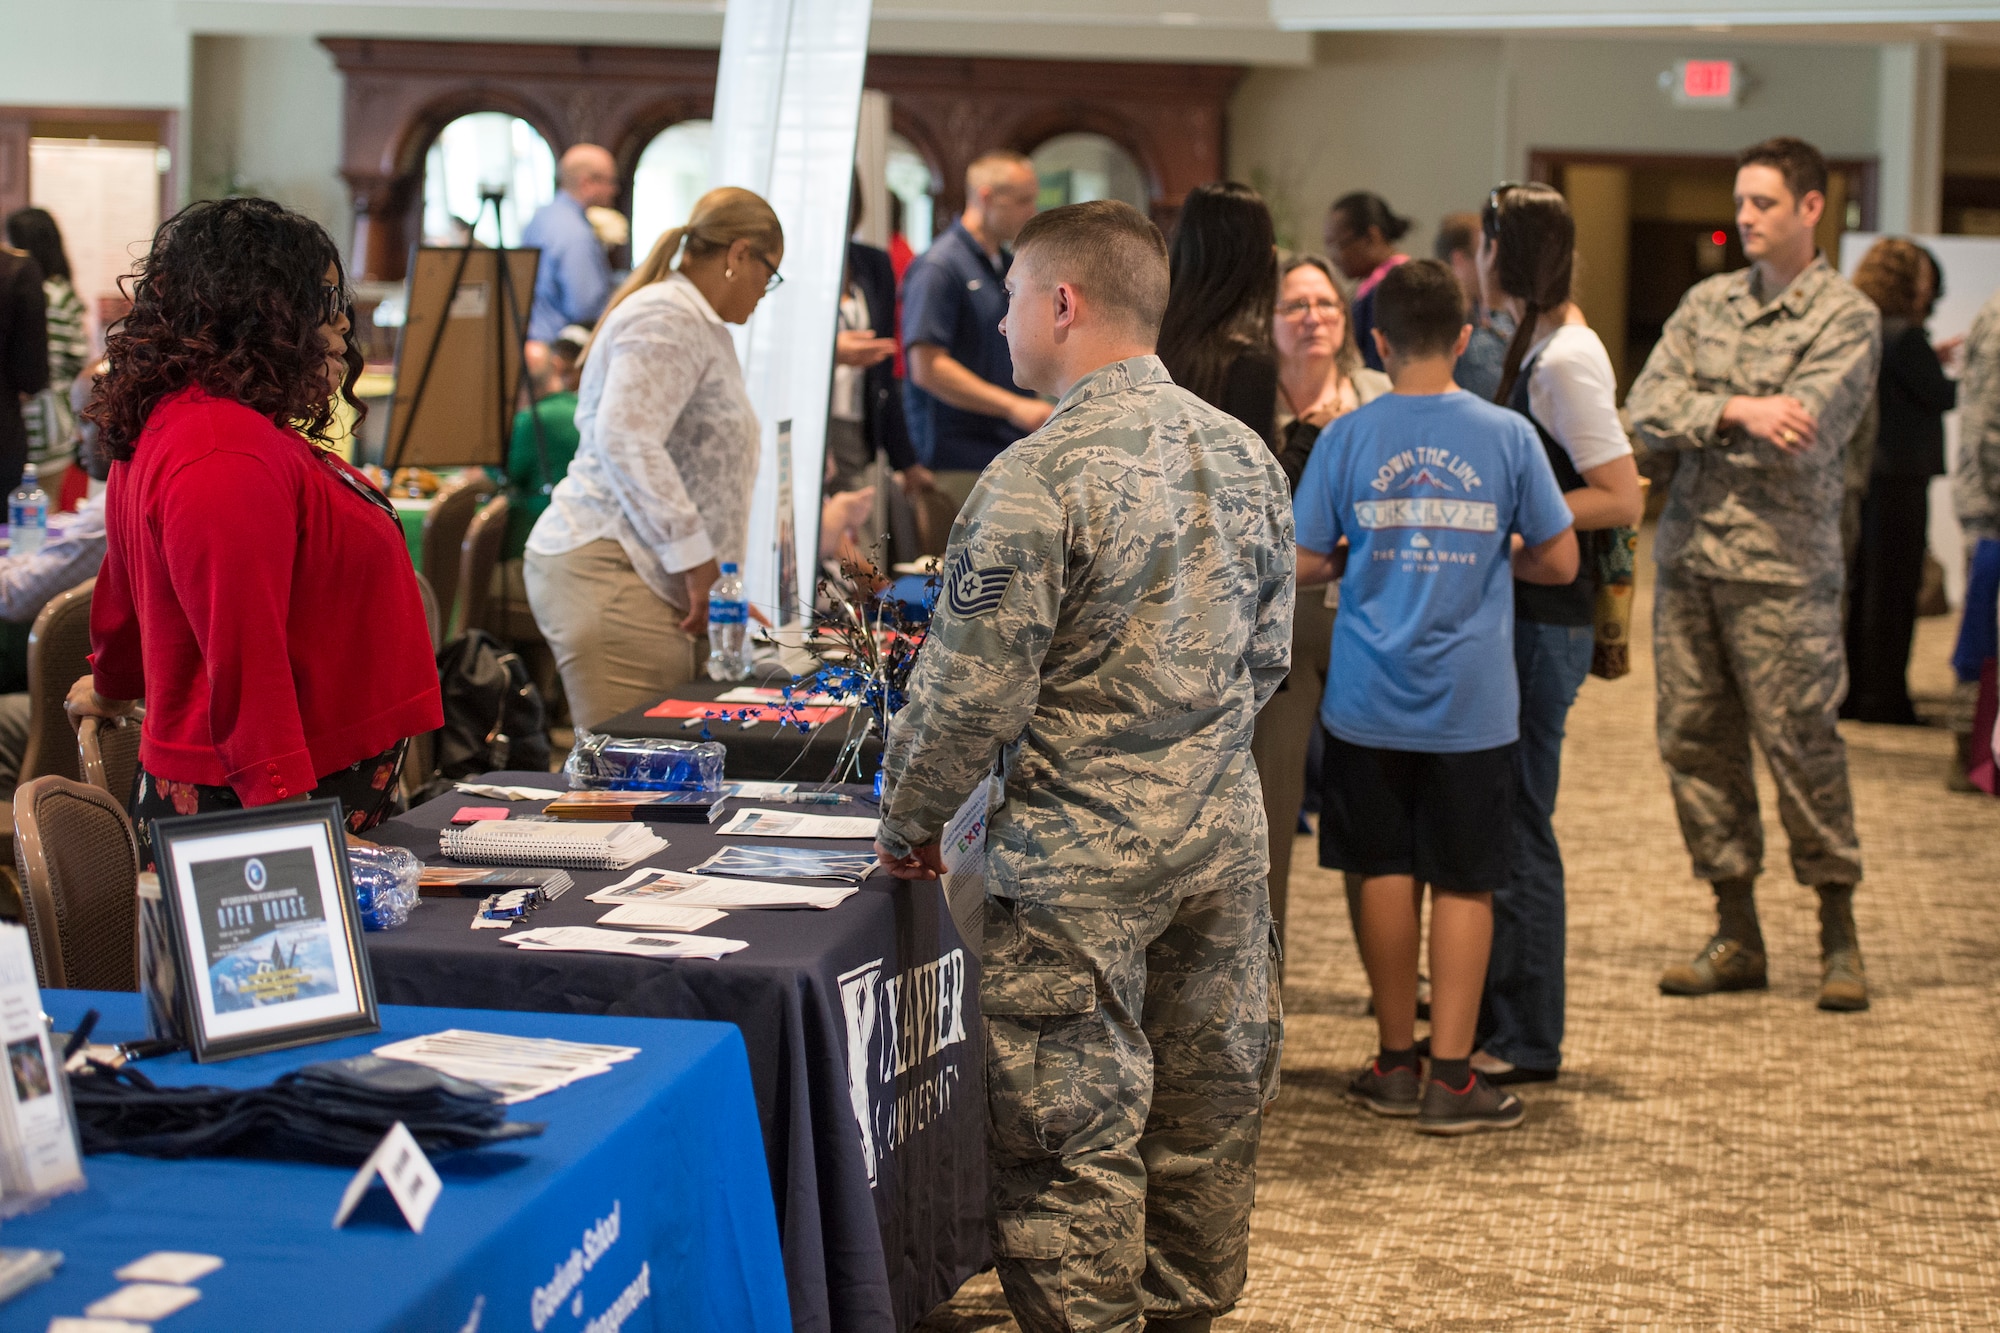 Advisors from more than 50 colleges will be on hand to provide information on educational development opportunities and various career programs at the annual 88th Force Support Squadron’s Education and Training Fair on Thursday, Oct. 24 from 10 a.m. to 2 p.m. at the National Museum of the United States Air Force. (U.S. Air Force photo/Wesley Farnsworth)